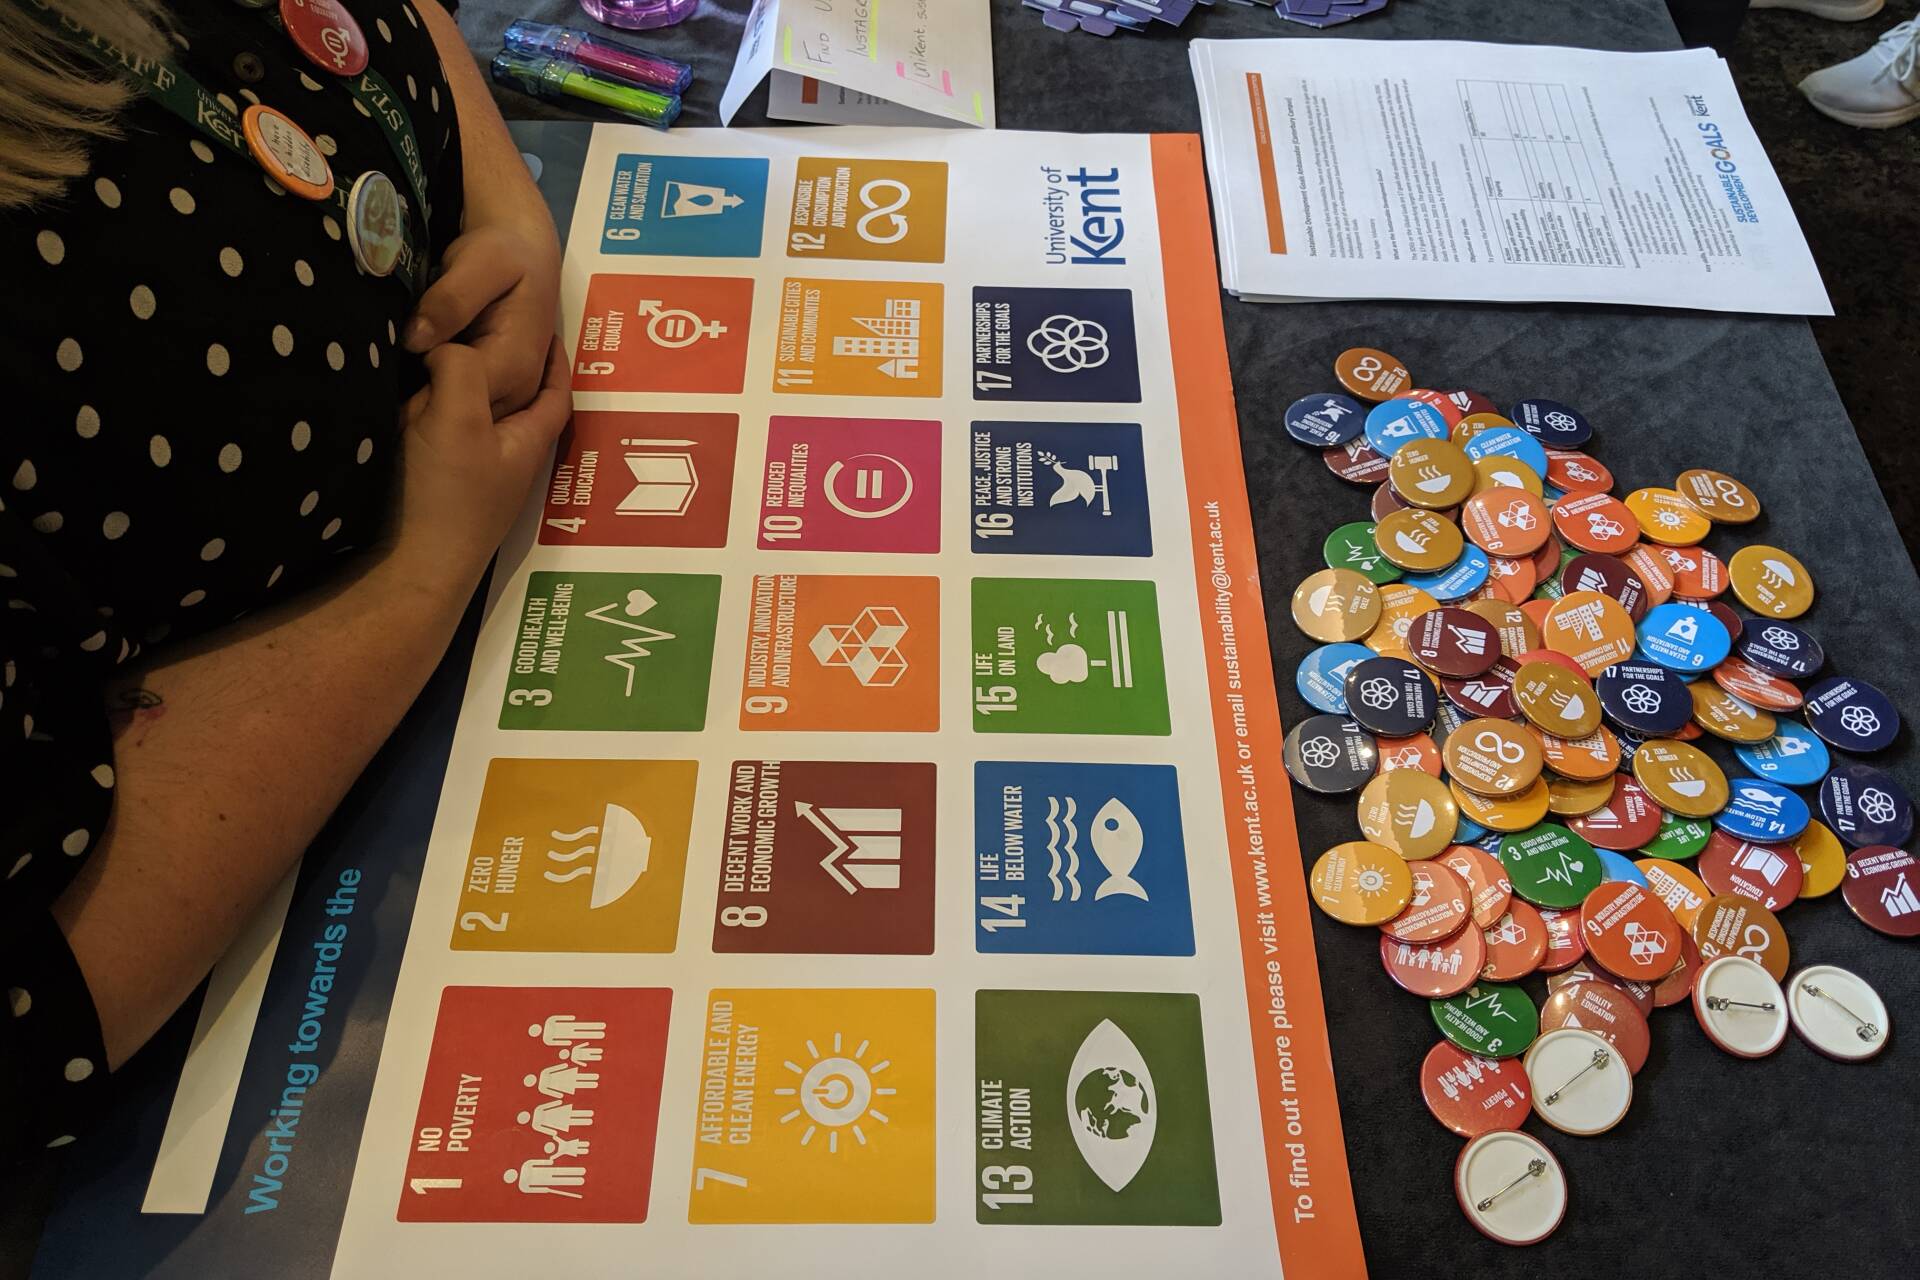 Poster of the SDGs and SDGs badges on a table